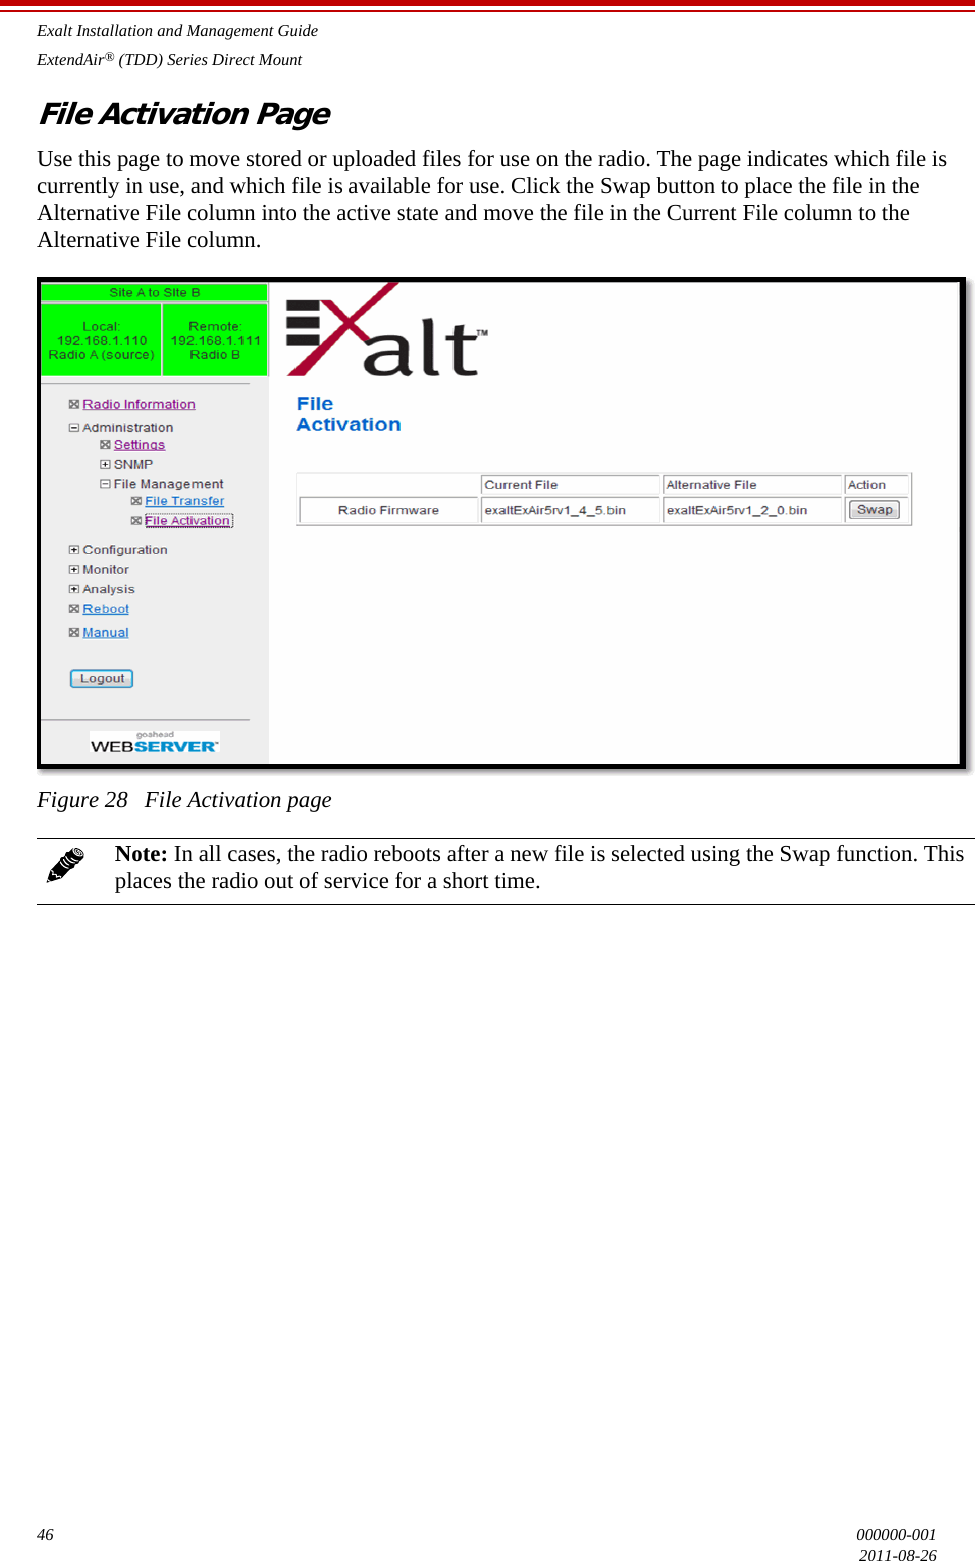 Exalt Installation and Management GuideExtendAir® (TDD) Series Direct Mount46 000000-0012011-08-26File Activation PageUse this page to move stored or uploaded files for use on the radio. The page indicates which file is currently in use, and which file is available for use. Click the Swap button to place the file in the Alternative File column into the active state and move the file in the Current File column to the Alternative File column.Figure 28   File Activation pageNote: In all cases, the radio reboots after a new file is selected using the Swap function. This places the radio out of service for a short time.